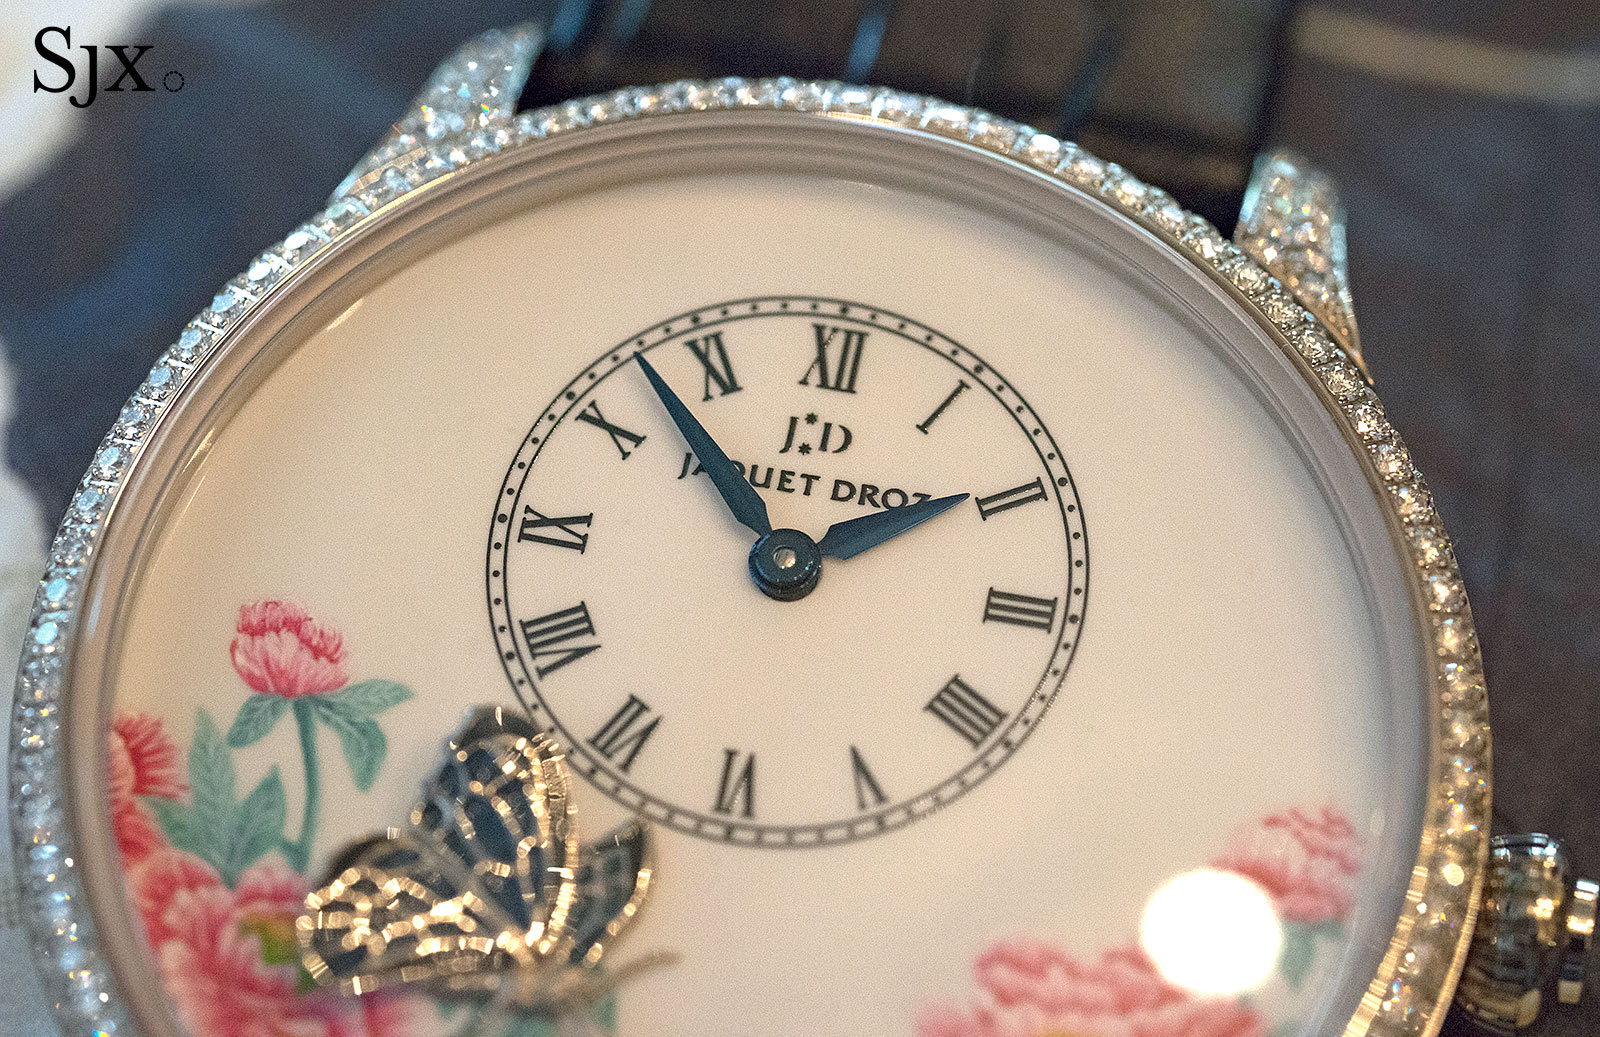 Jaquet Droz Petite Heure Minute The Butterfly Journey 5